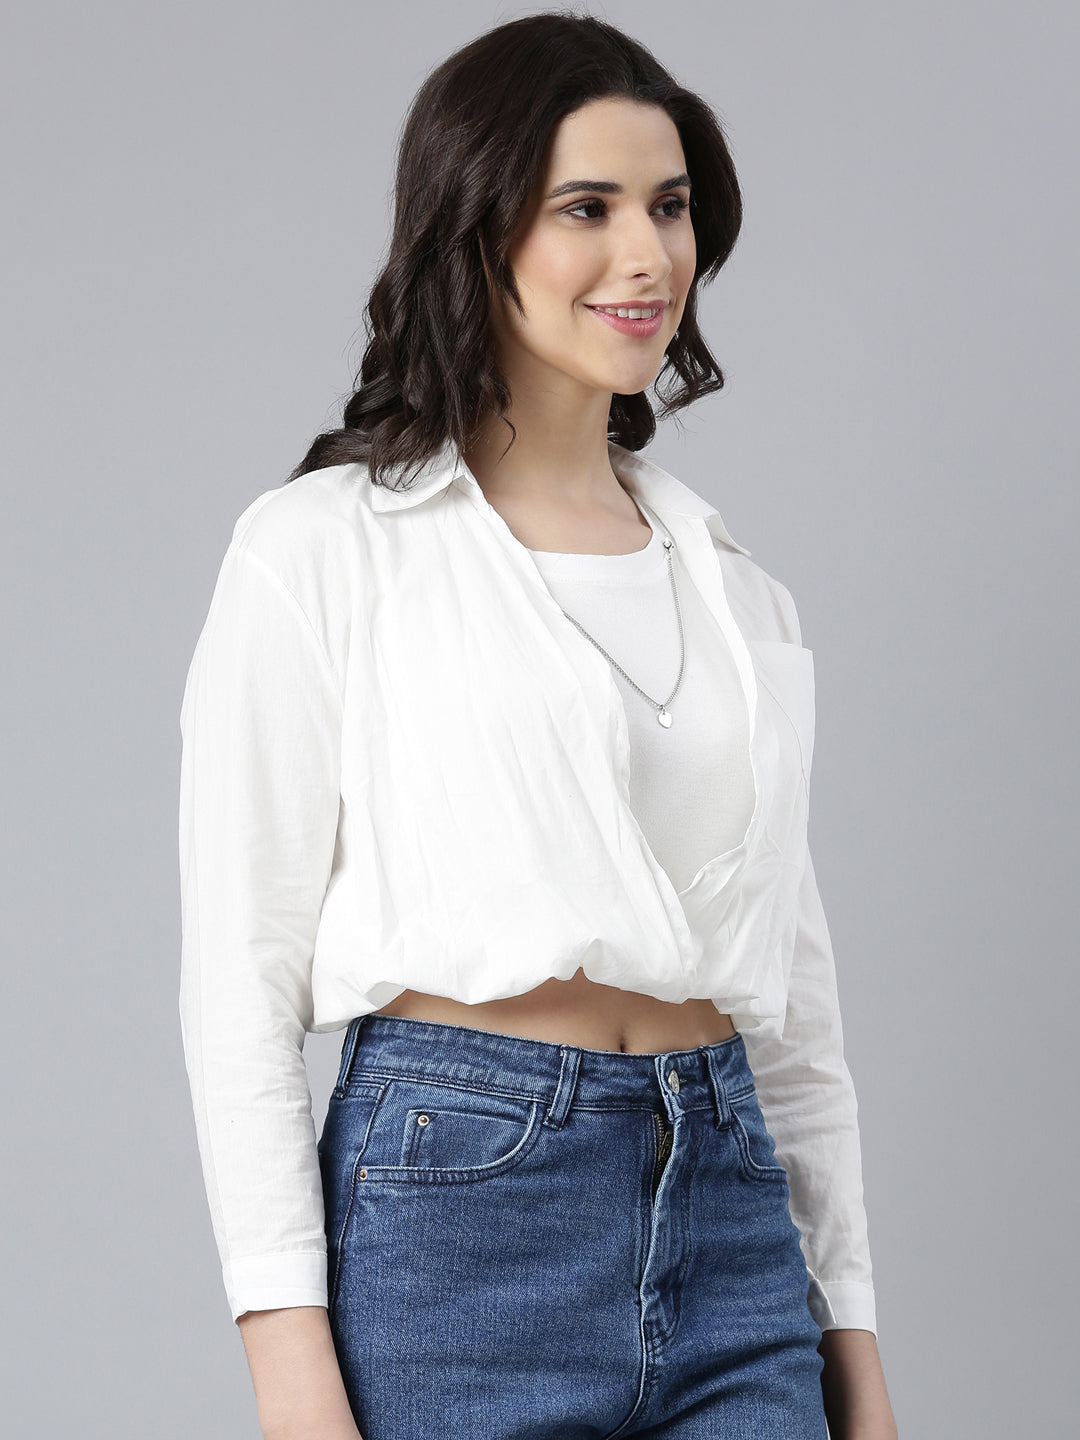 Women Solid Off White Shirt Style Top Comes with Attached Inner Top and Neck Chain